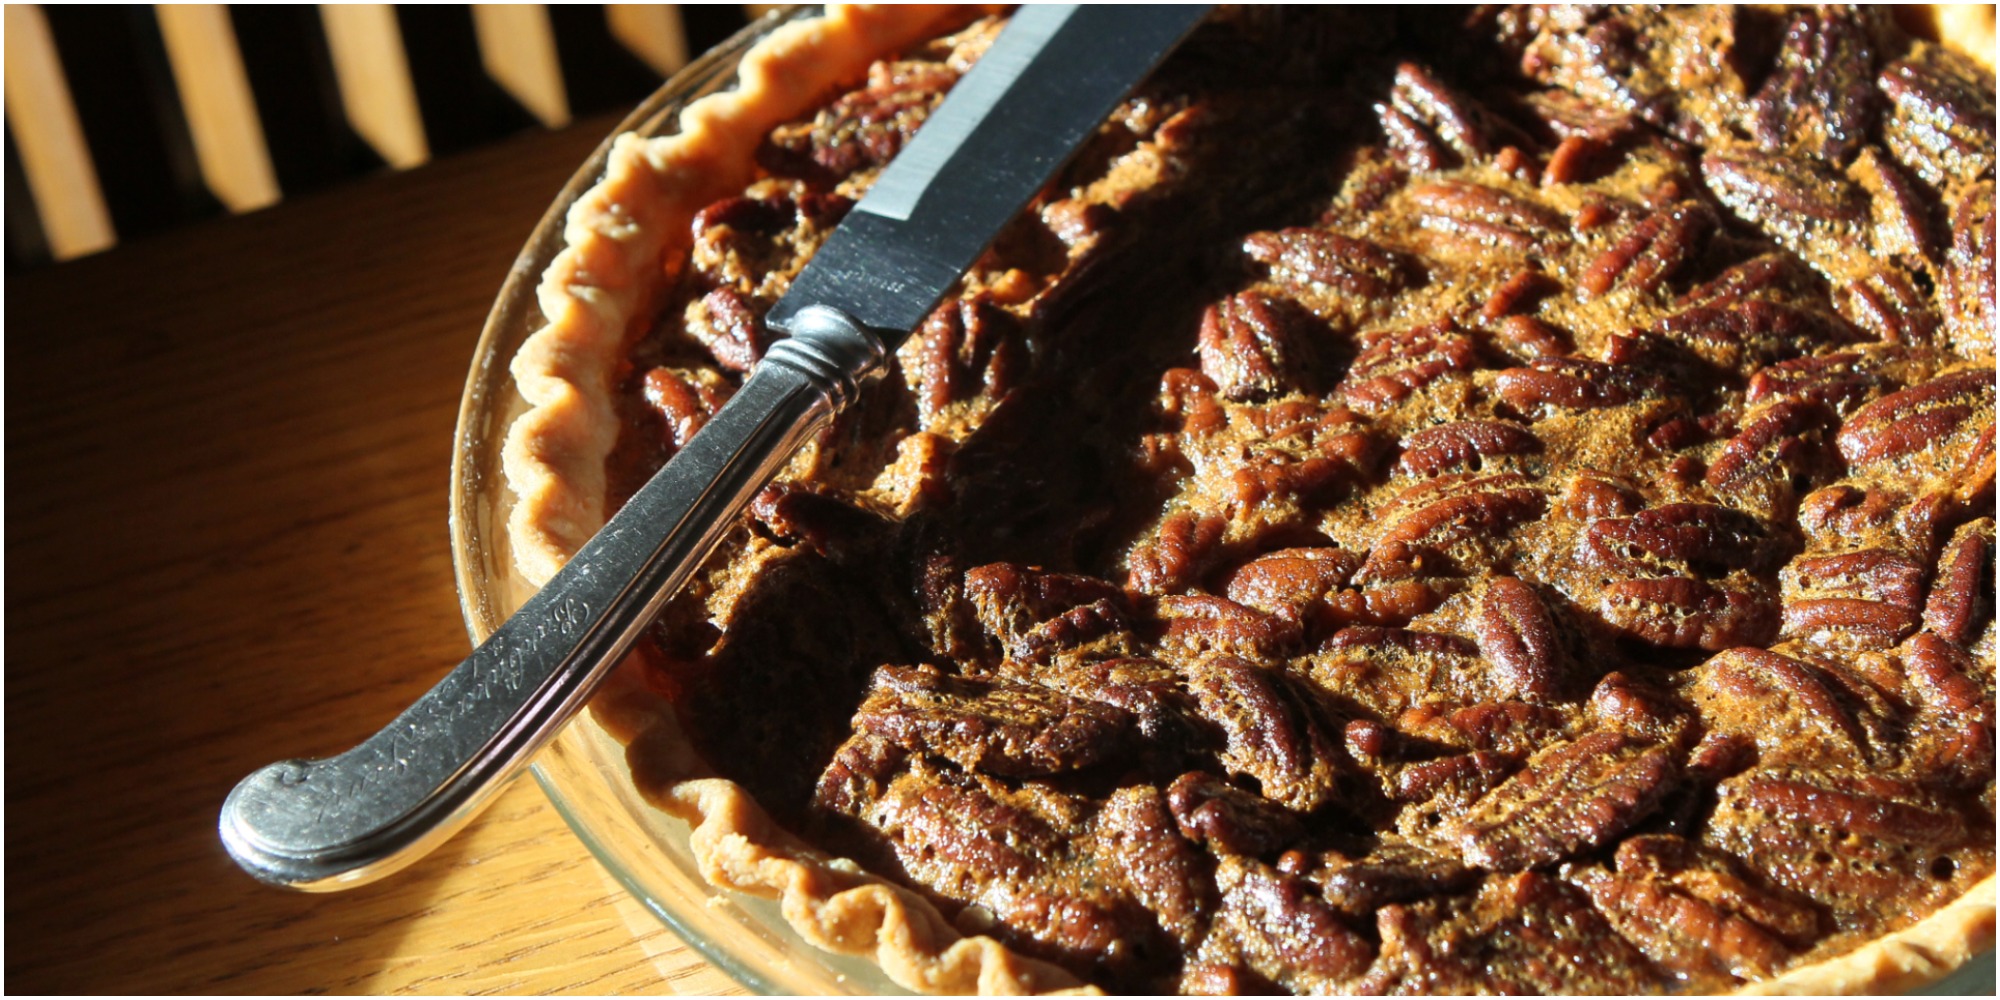 A photograph of a pecan pie with a knife lying across it.